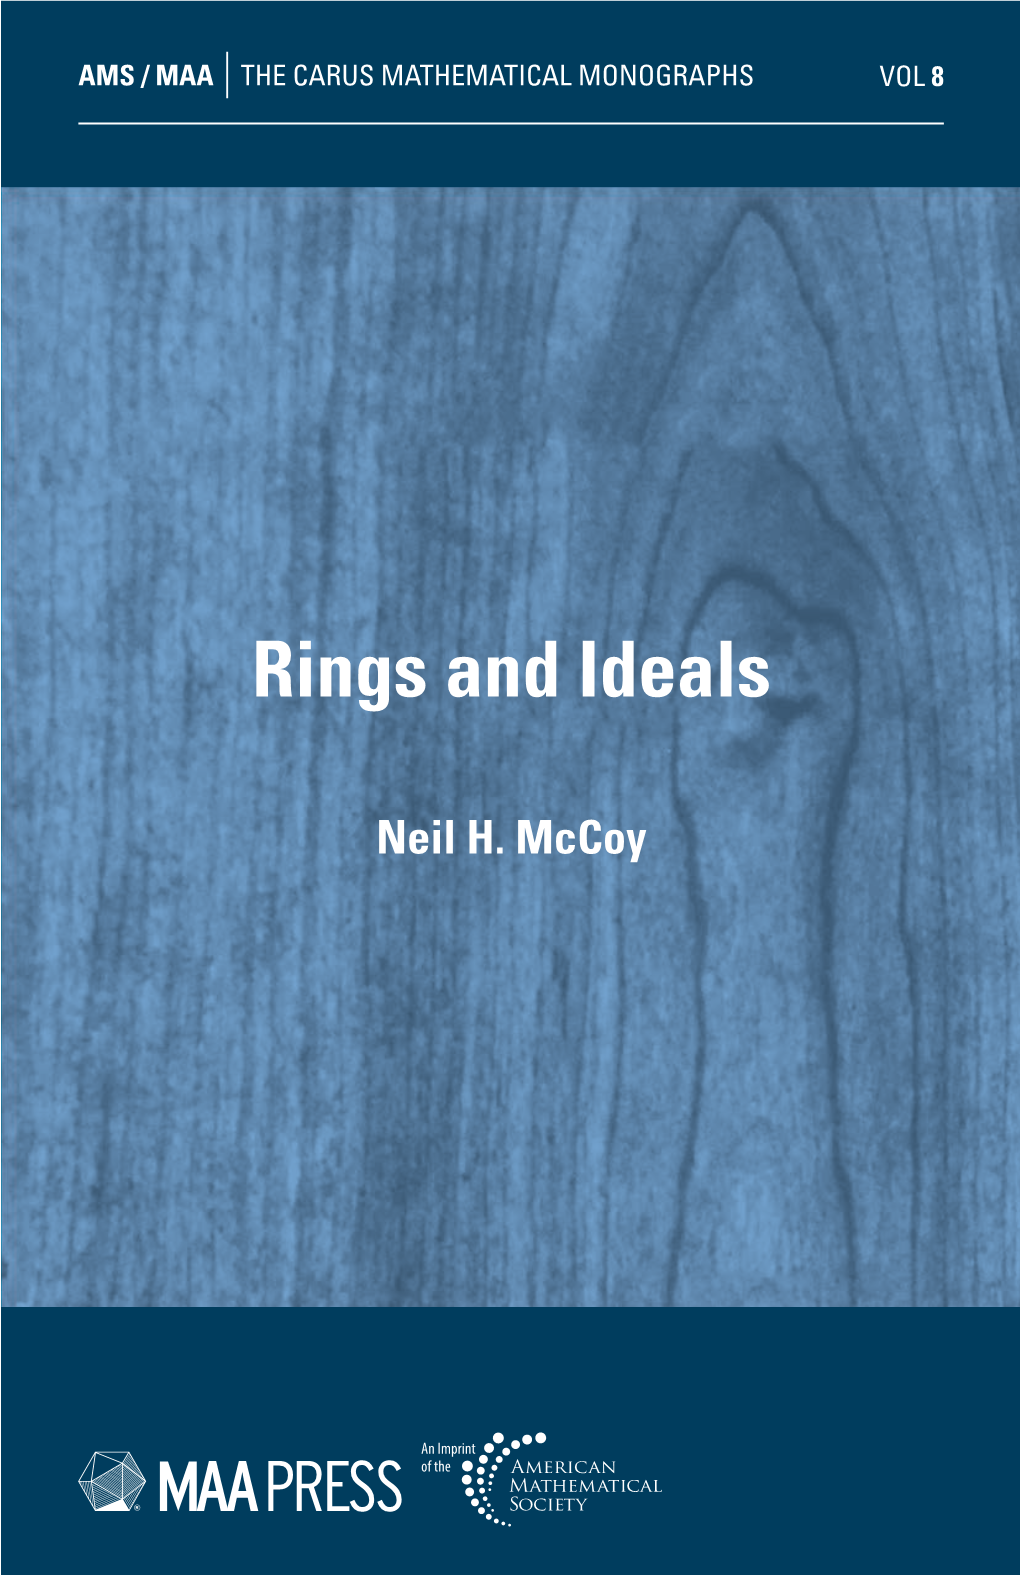 Rings and Ideals